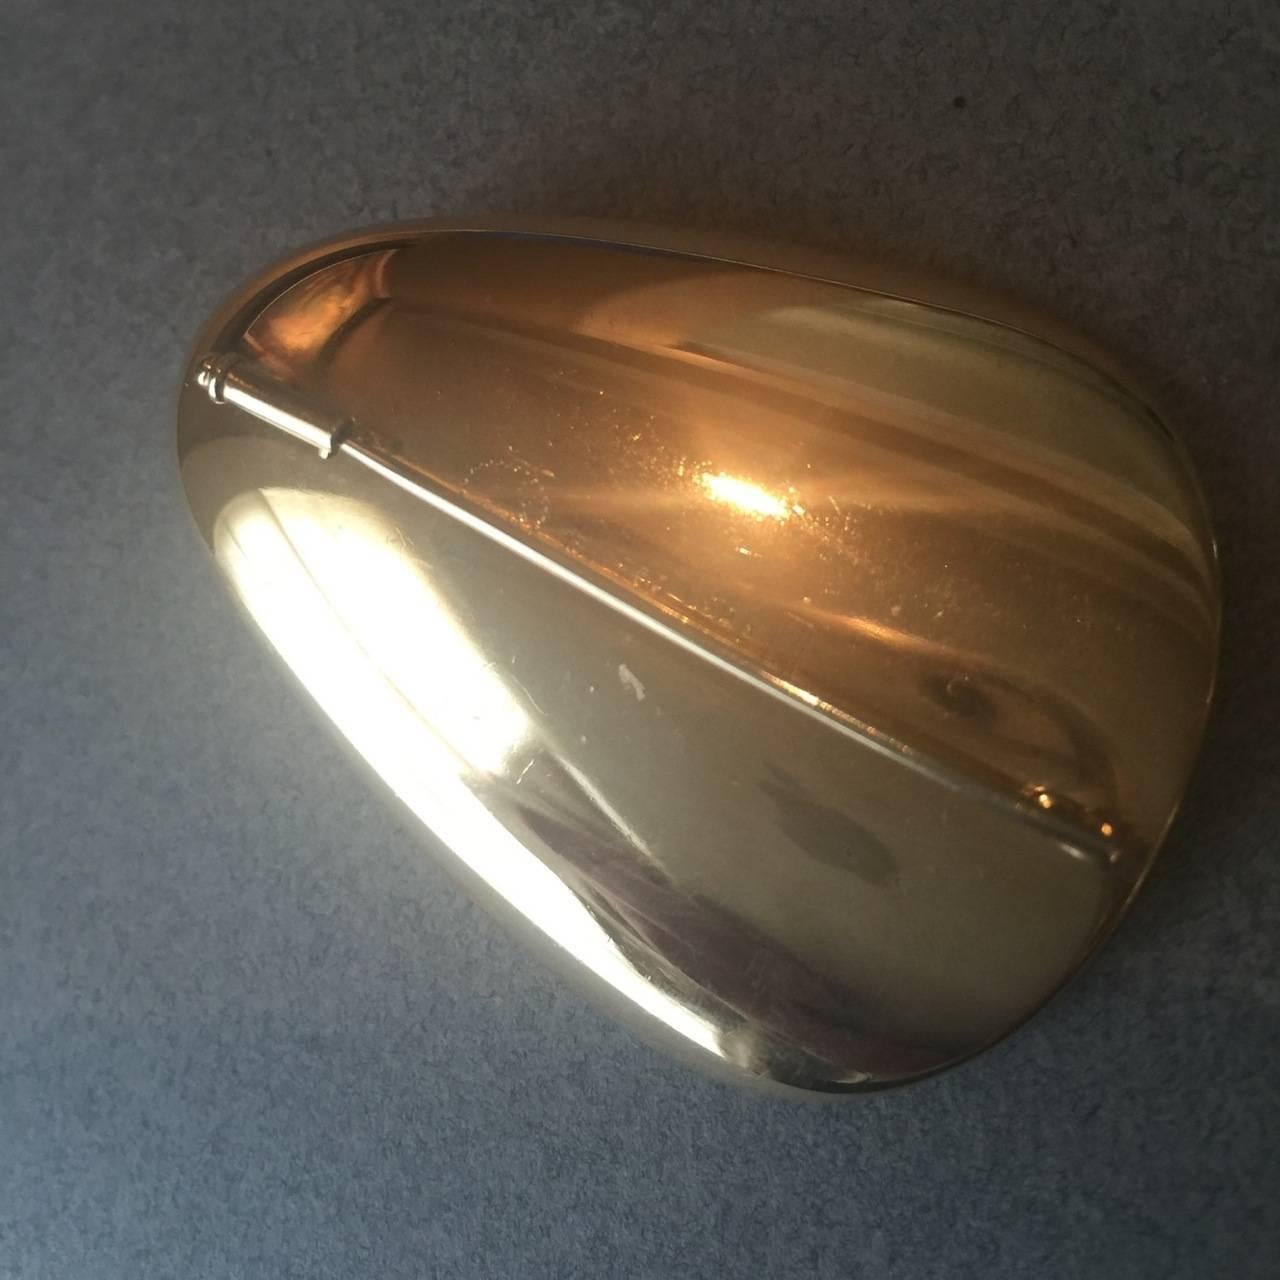 Georg Jensen Brooch/Pendant by Nanna Ditzel, no. 1328.

Shell design in 18kt gold with pearl. Sliding tubular clasp with hole to convert to a pendant. 

Images show pendant on a Georg Jensen braided leather rope with sterling silver clasp which